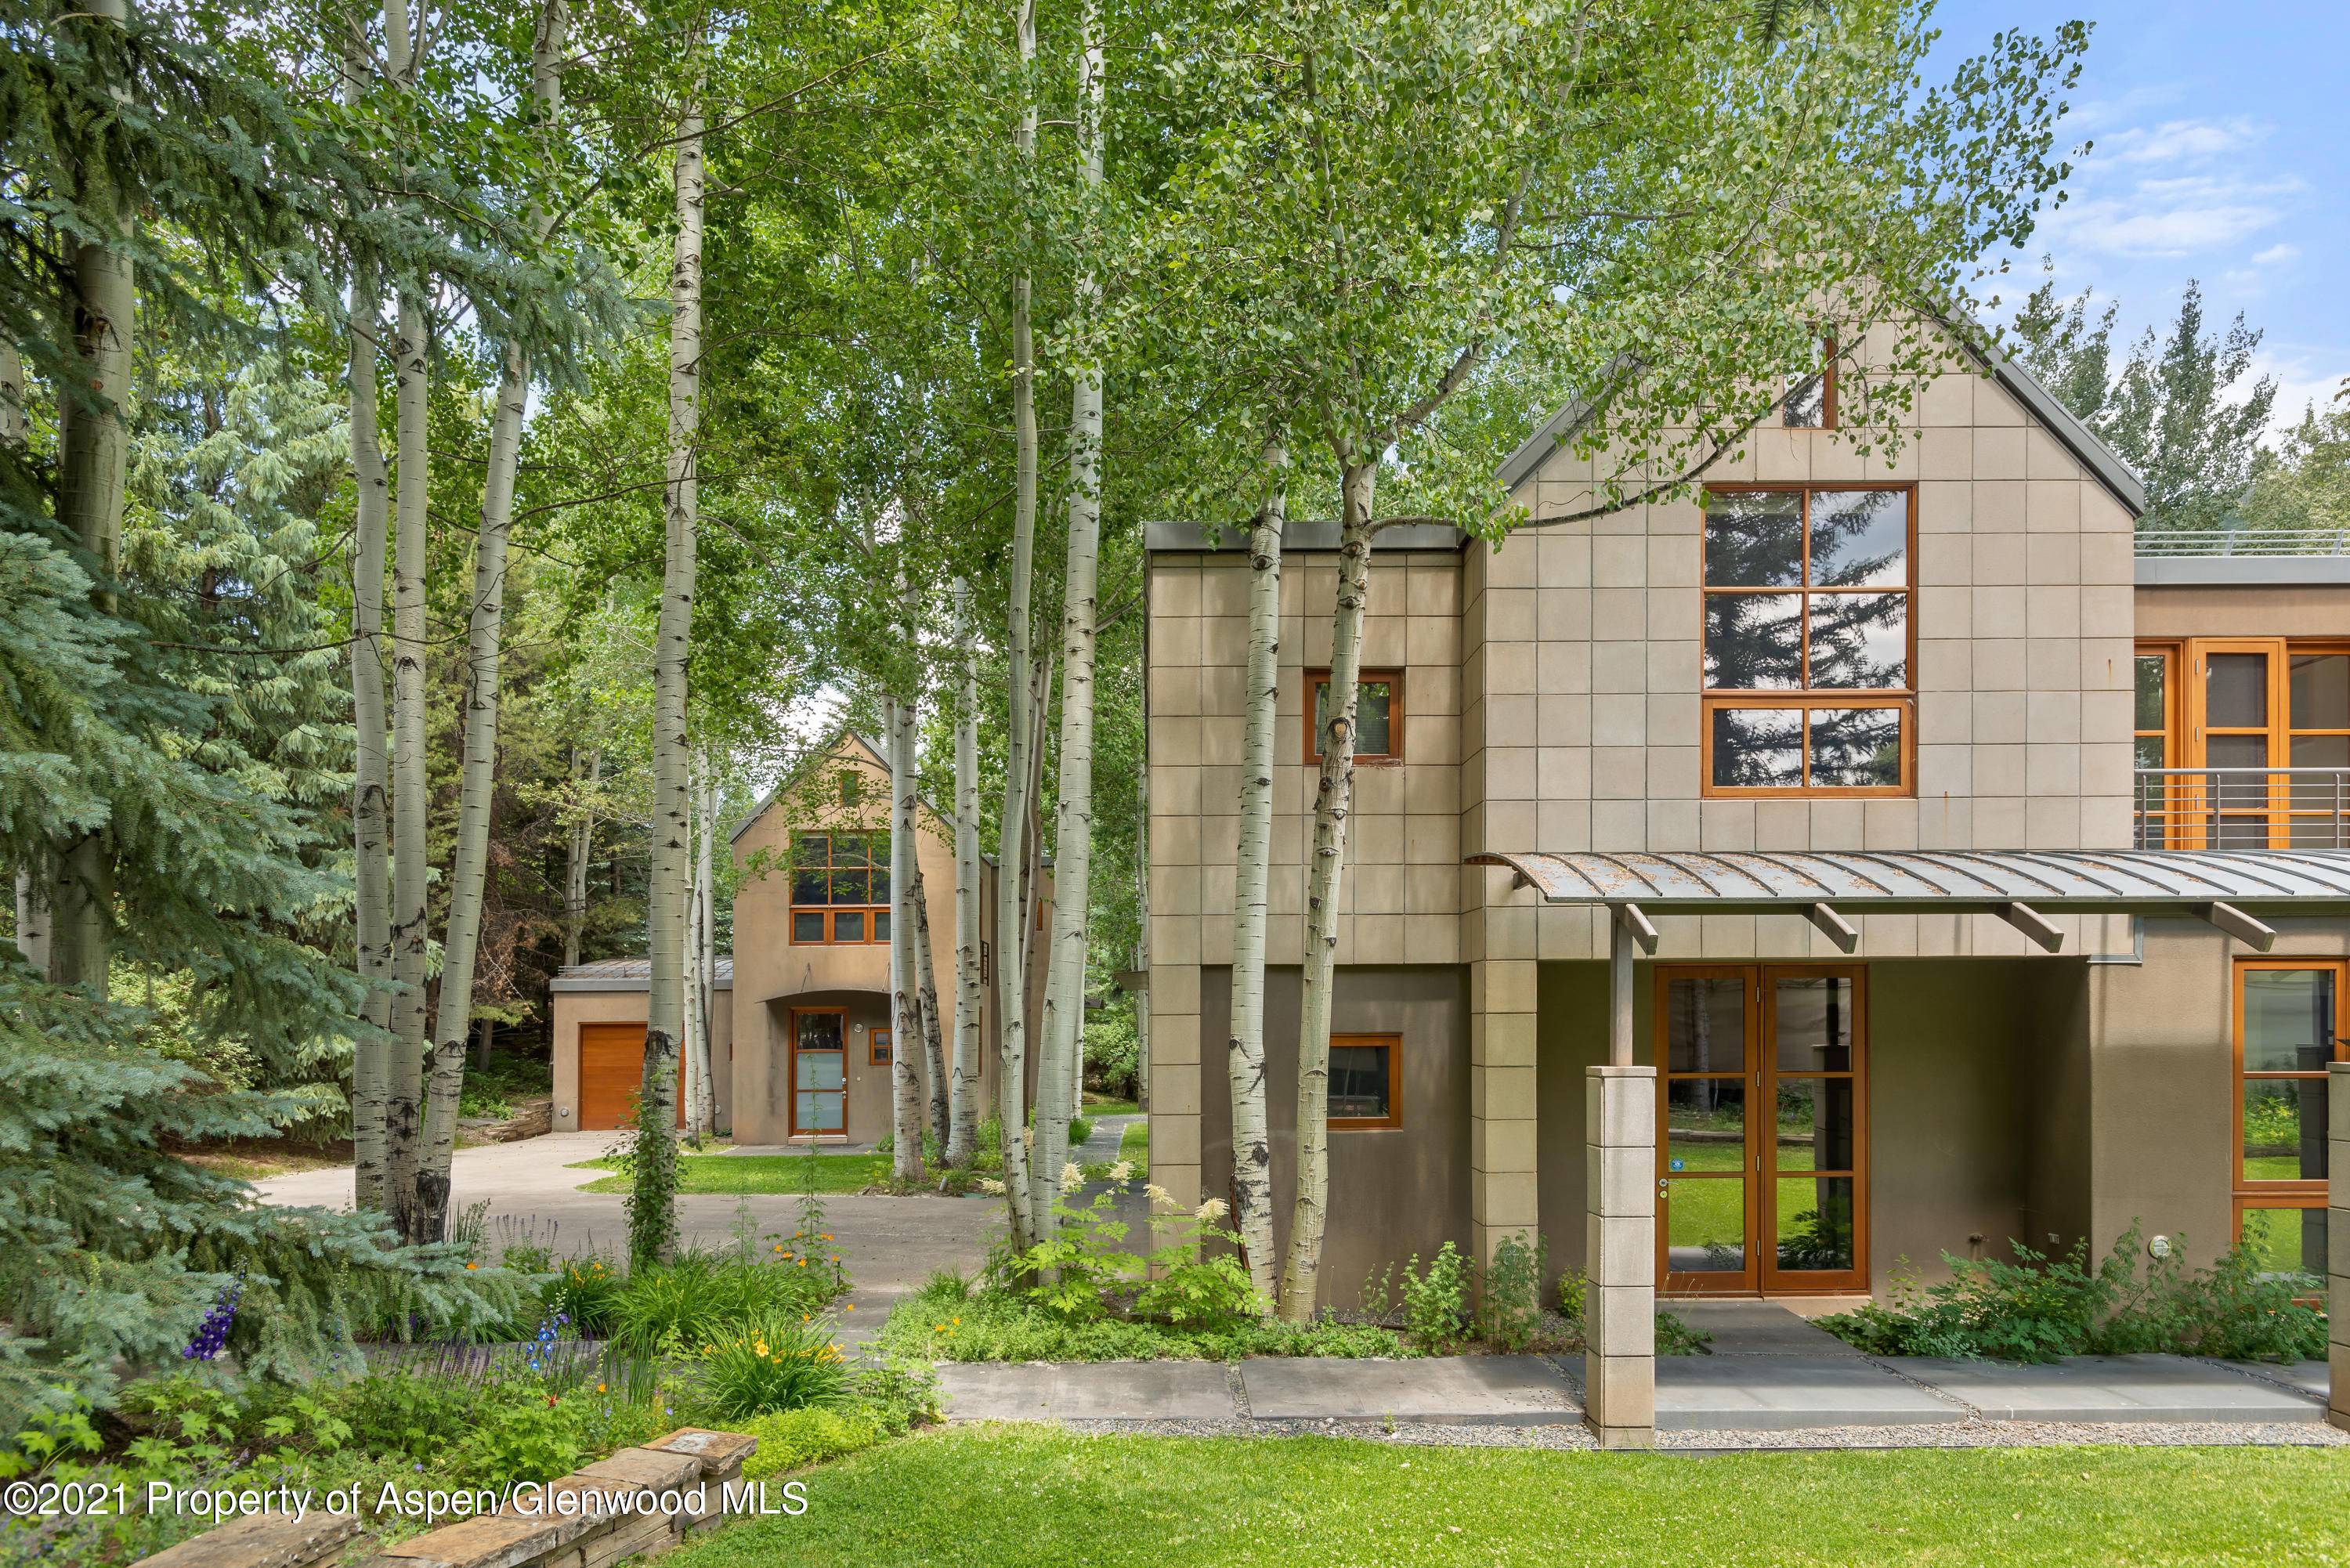 There exist only 21 homes in Aspen's famous West End neighborhood that overlook the Hallam Lake Nature Preserve.